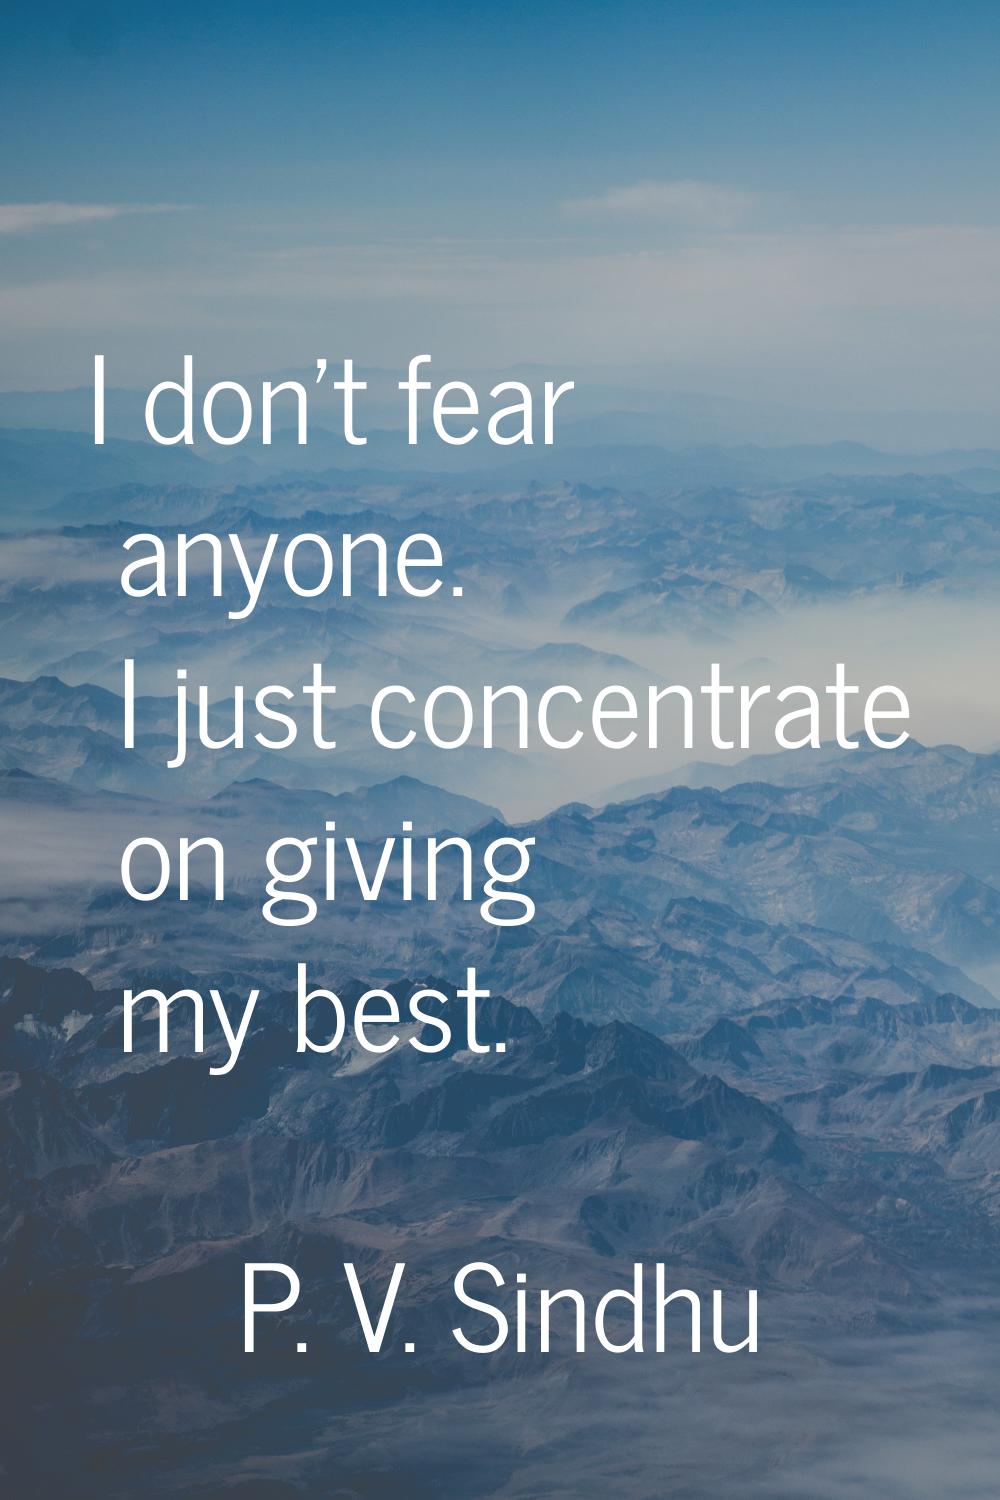 I don't fear anyone. I just concentrate on giving my best.